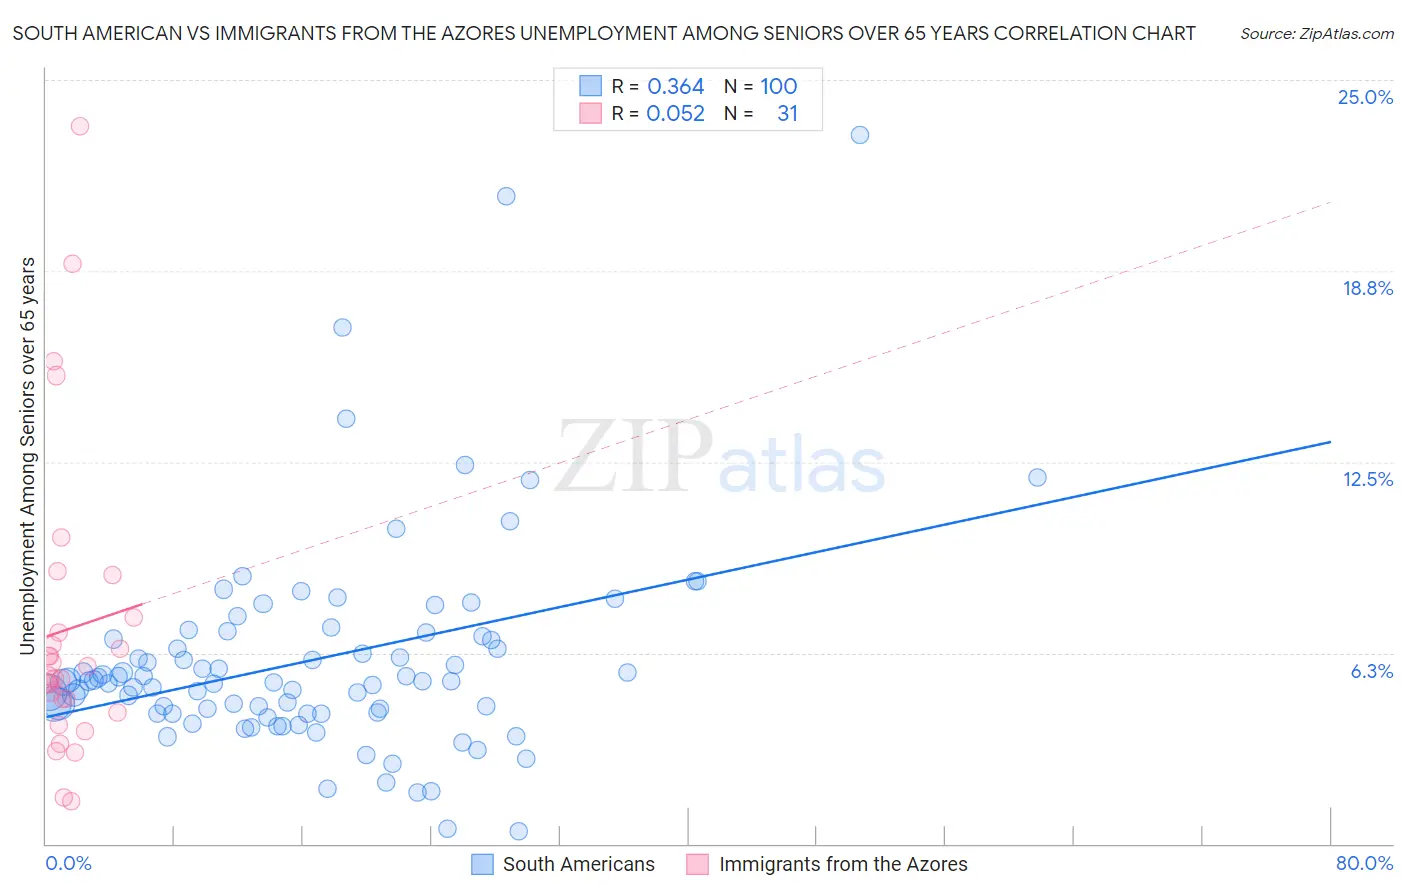 South American vs Immigrants from the Azores Unemployment Among Seniors over 65 years